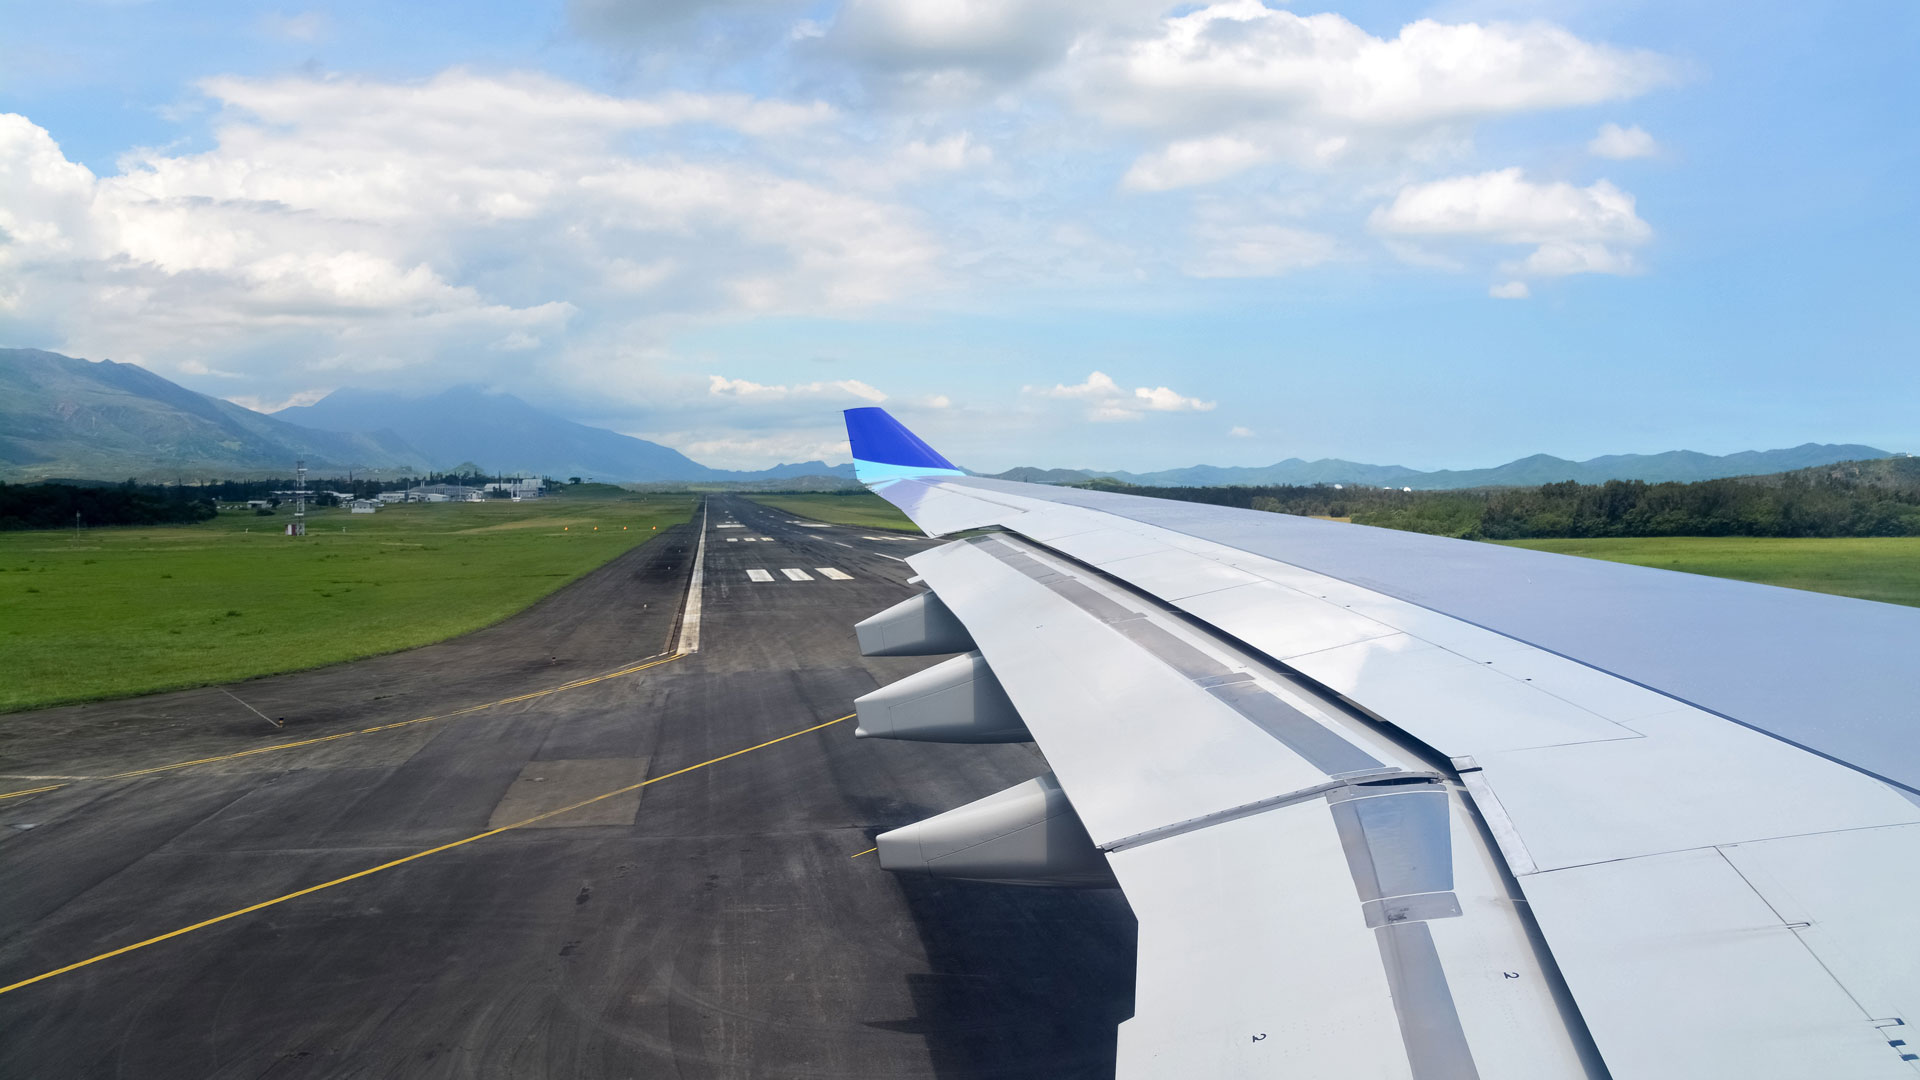 A photo of a plane wing over a runway.